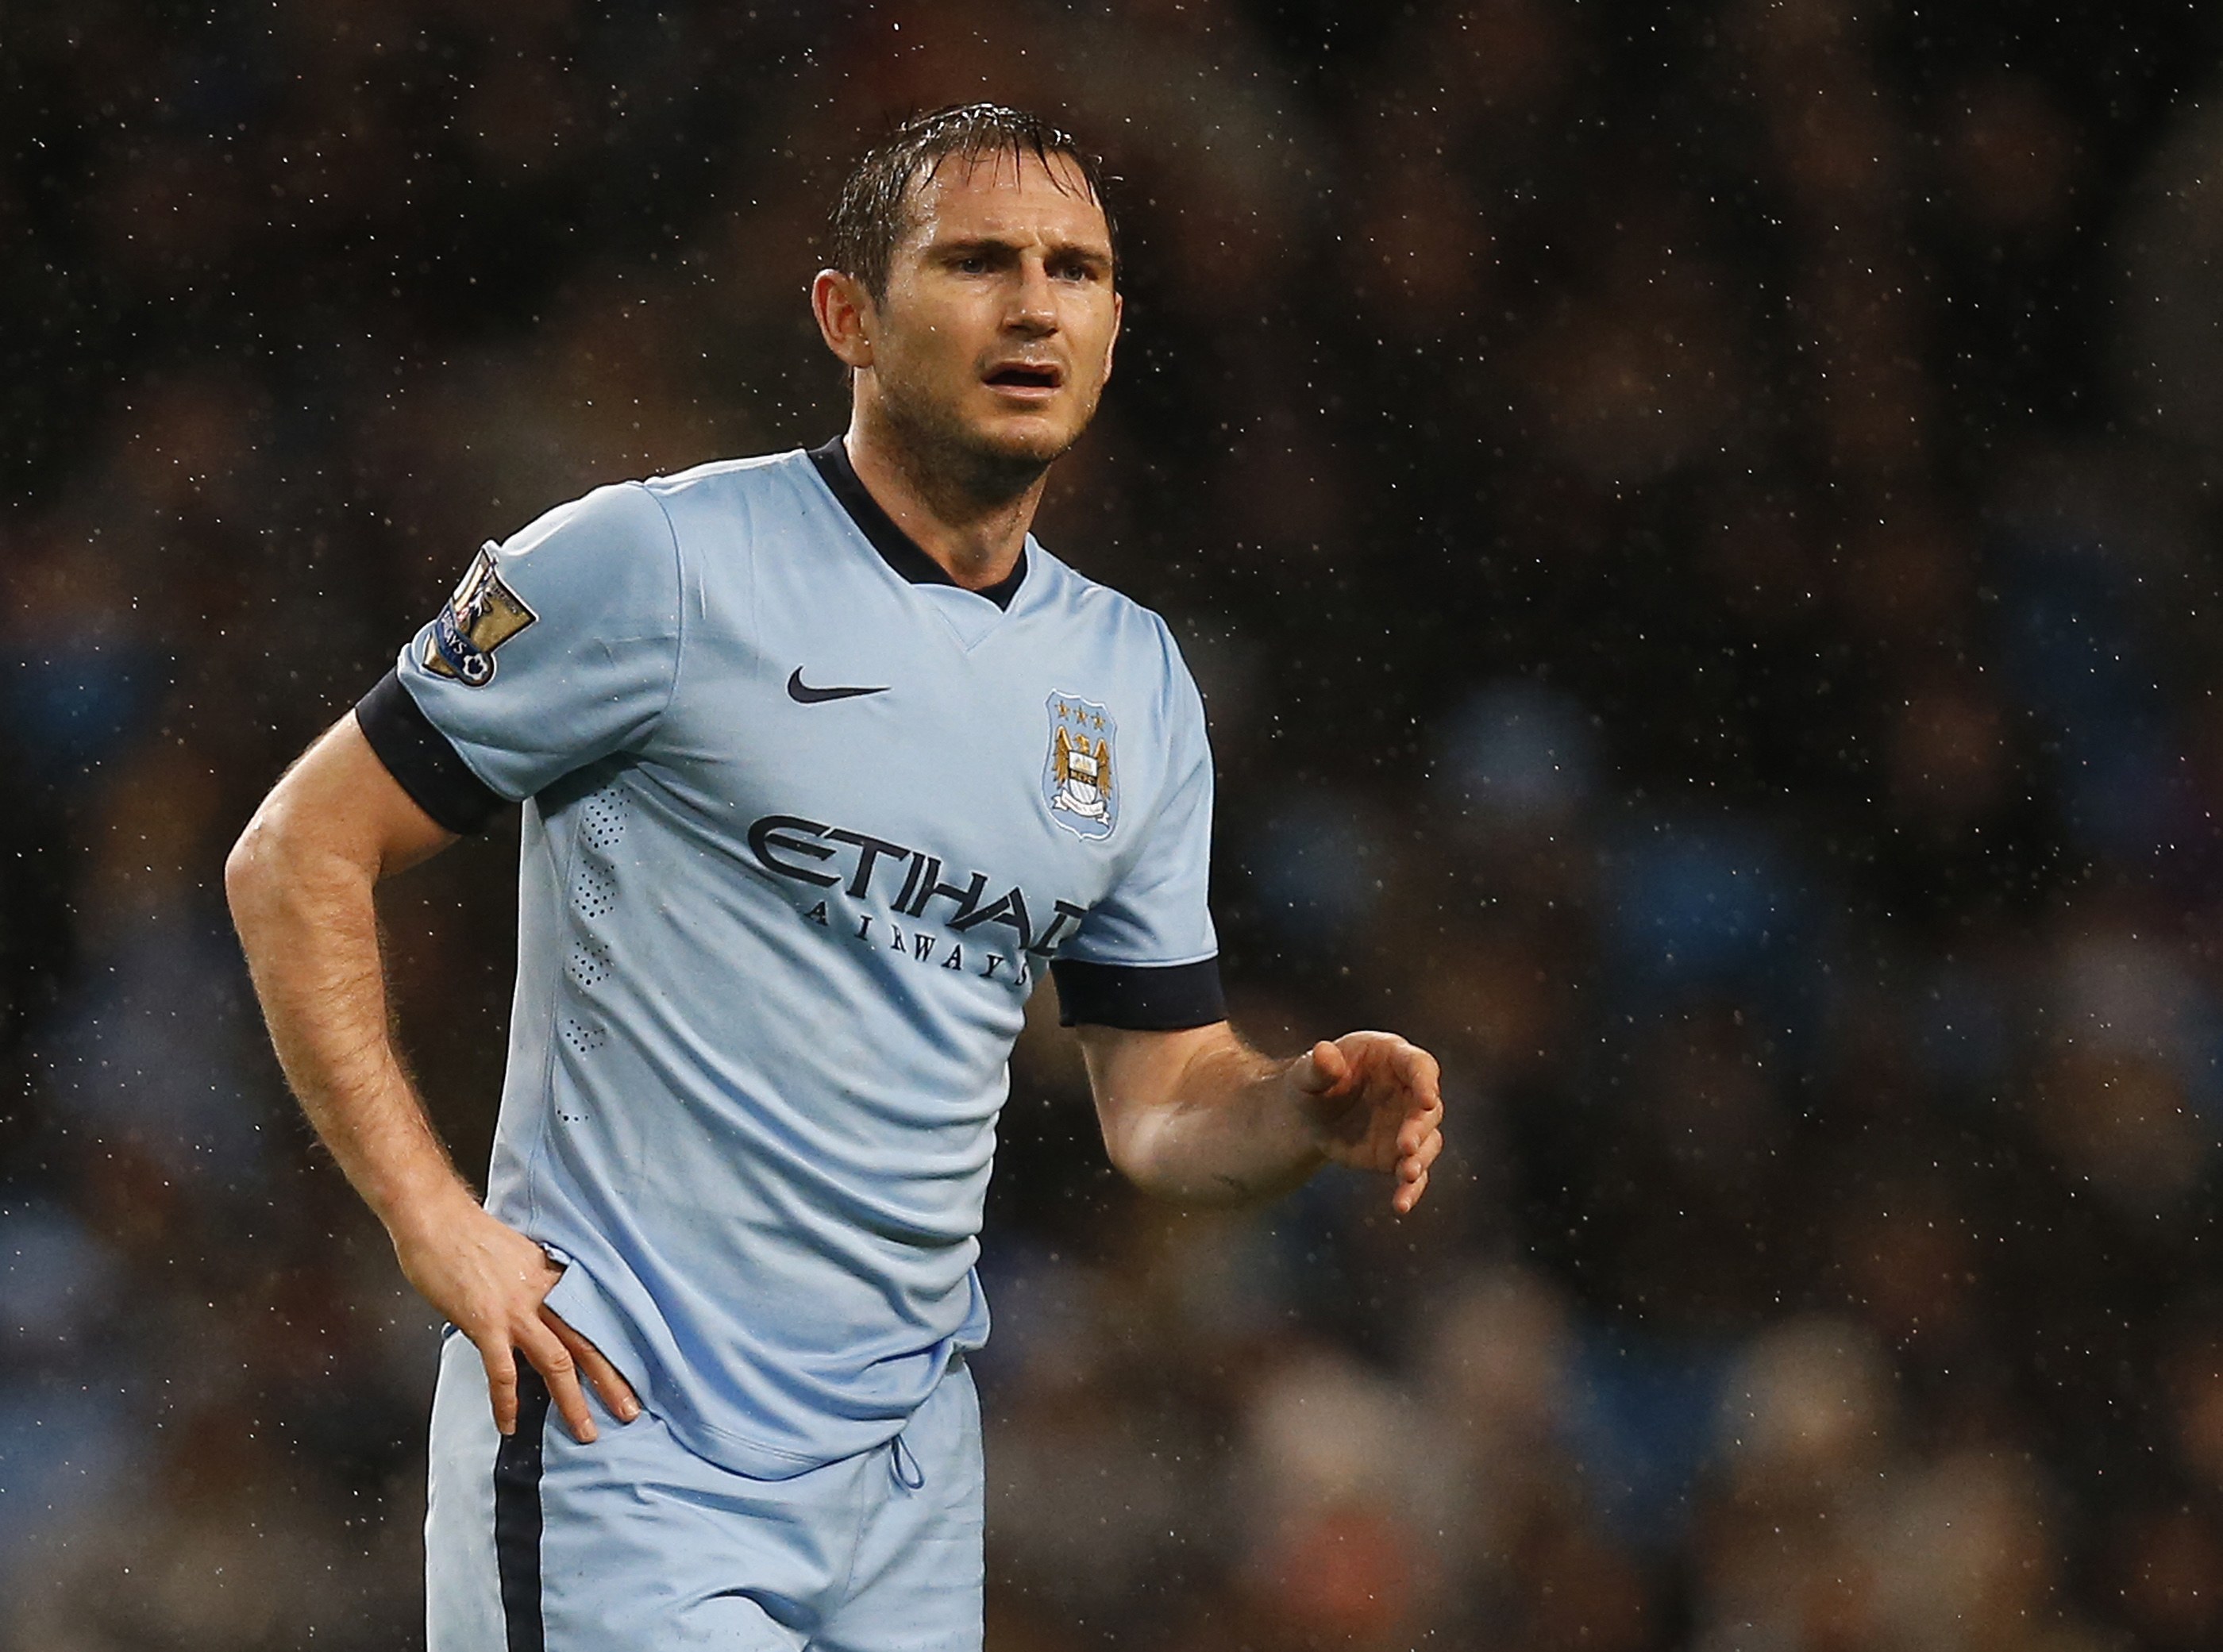 Manchester City's Lampard looks on during their English Premier League soccer match against Sunderland at the Etihad Stadium in Manchester